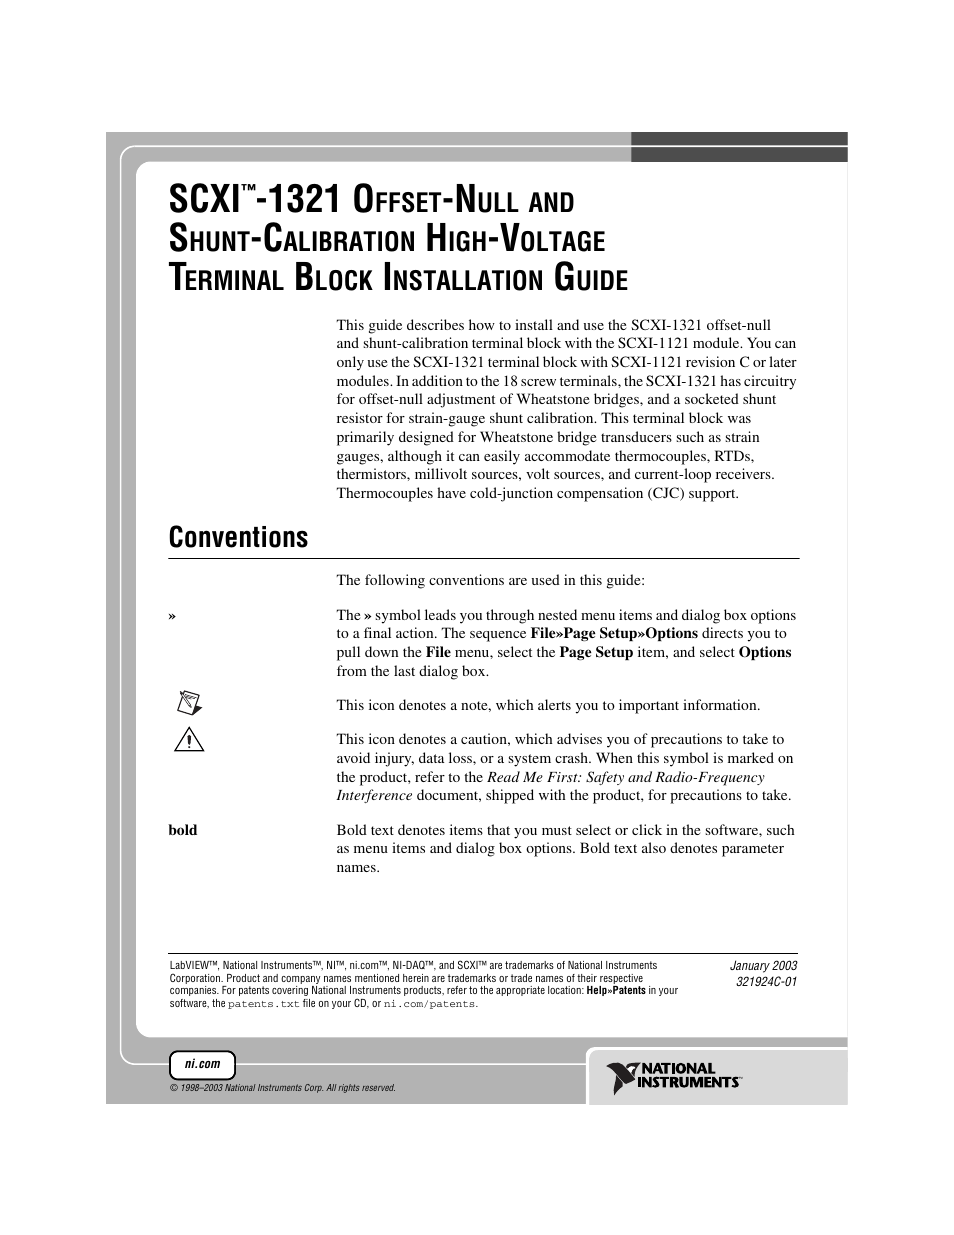 National Instruments SCXI-1321 User Manual | 16 pages